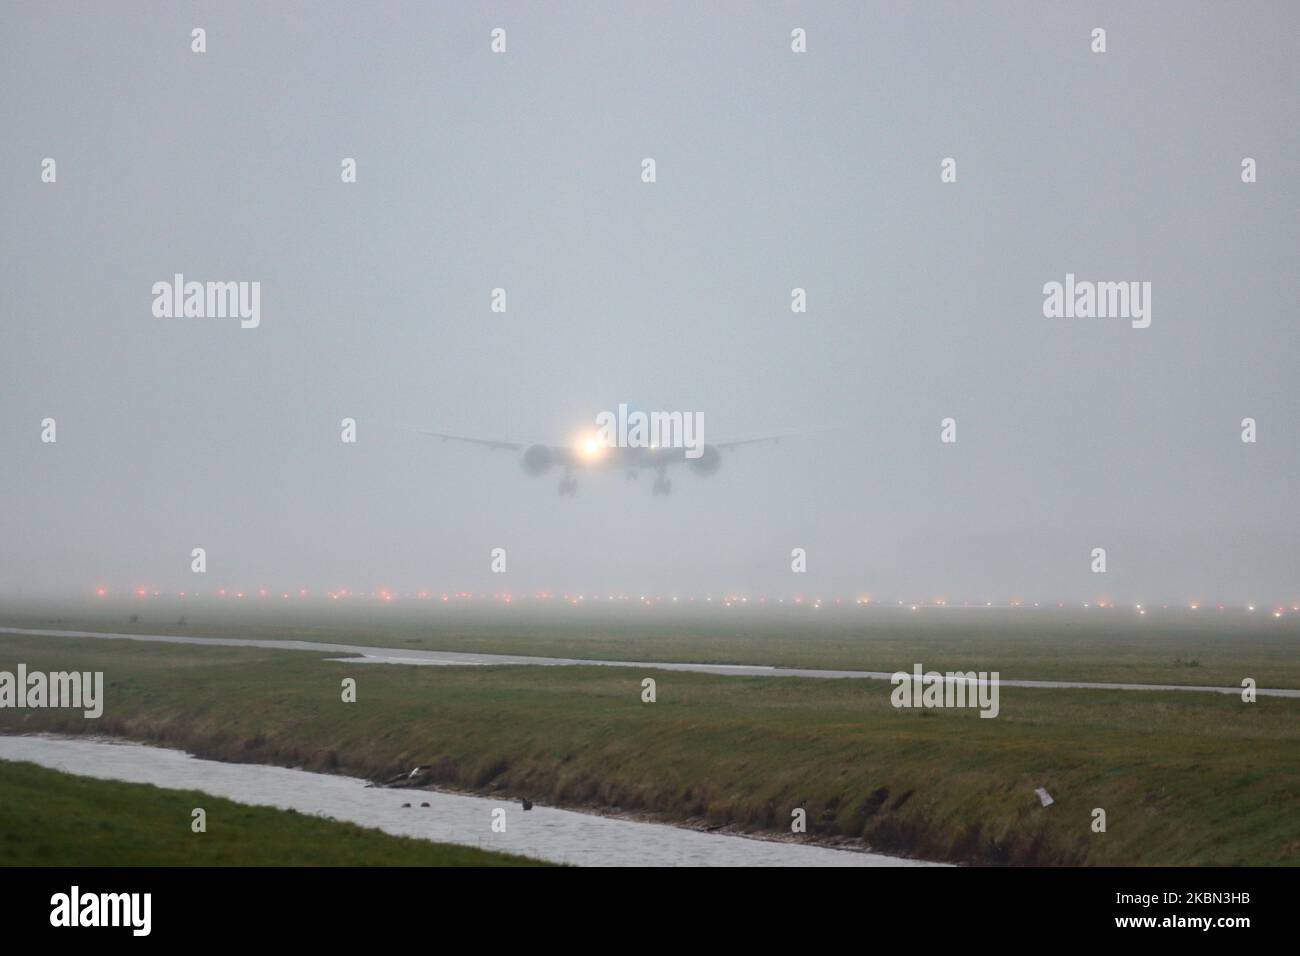 A KLM ASIA Boeing 777-200 commercial aircraft as seen on final approach landing at Polderbaan runway at Amsterdam Schiphol International Airport AMS EHAM in bad weather with mist and rain. The Boeing 777 or B772 wide body long haul airplane has the registration PH-BQK and the name of Mount Kilimanjaro while is powered by 2x GE jet engines. KLM Koninklijke Luchtvaart Maatschappij KL is the flag carrier of the Netherlands, the oldest airline in the world and member of SkyTeam aviation alliance. February 28, 2020 (Photo by Nicolas Economou/NurPhoto) Stock Photo